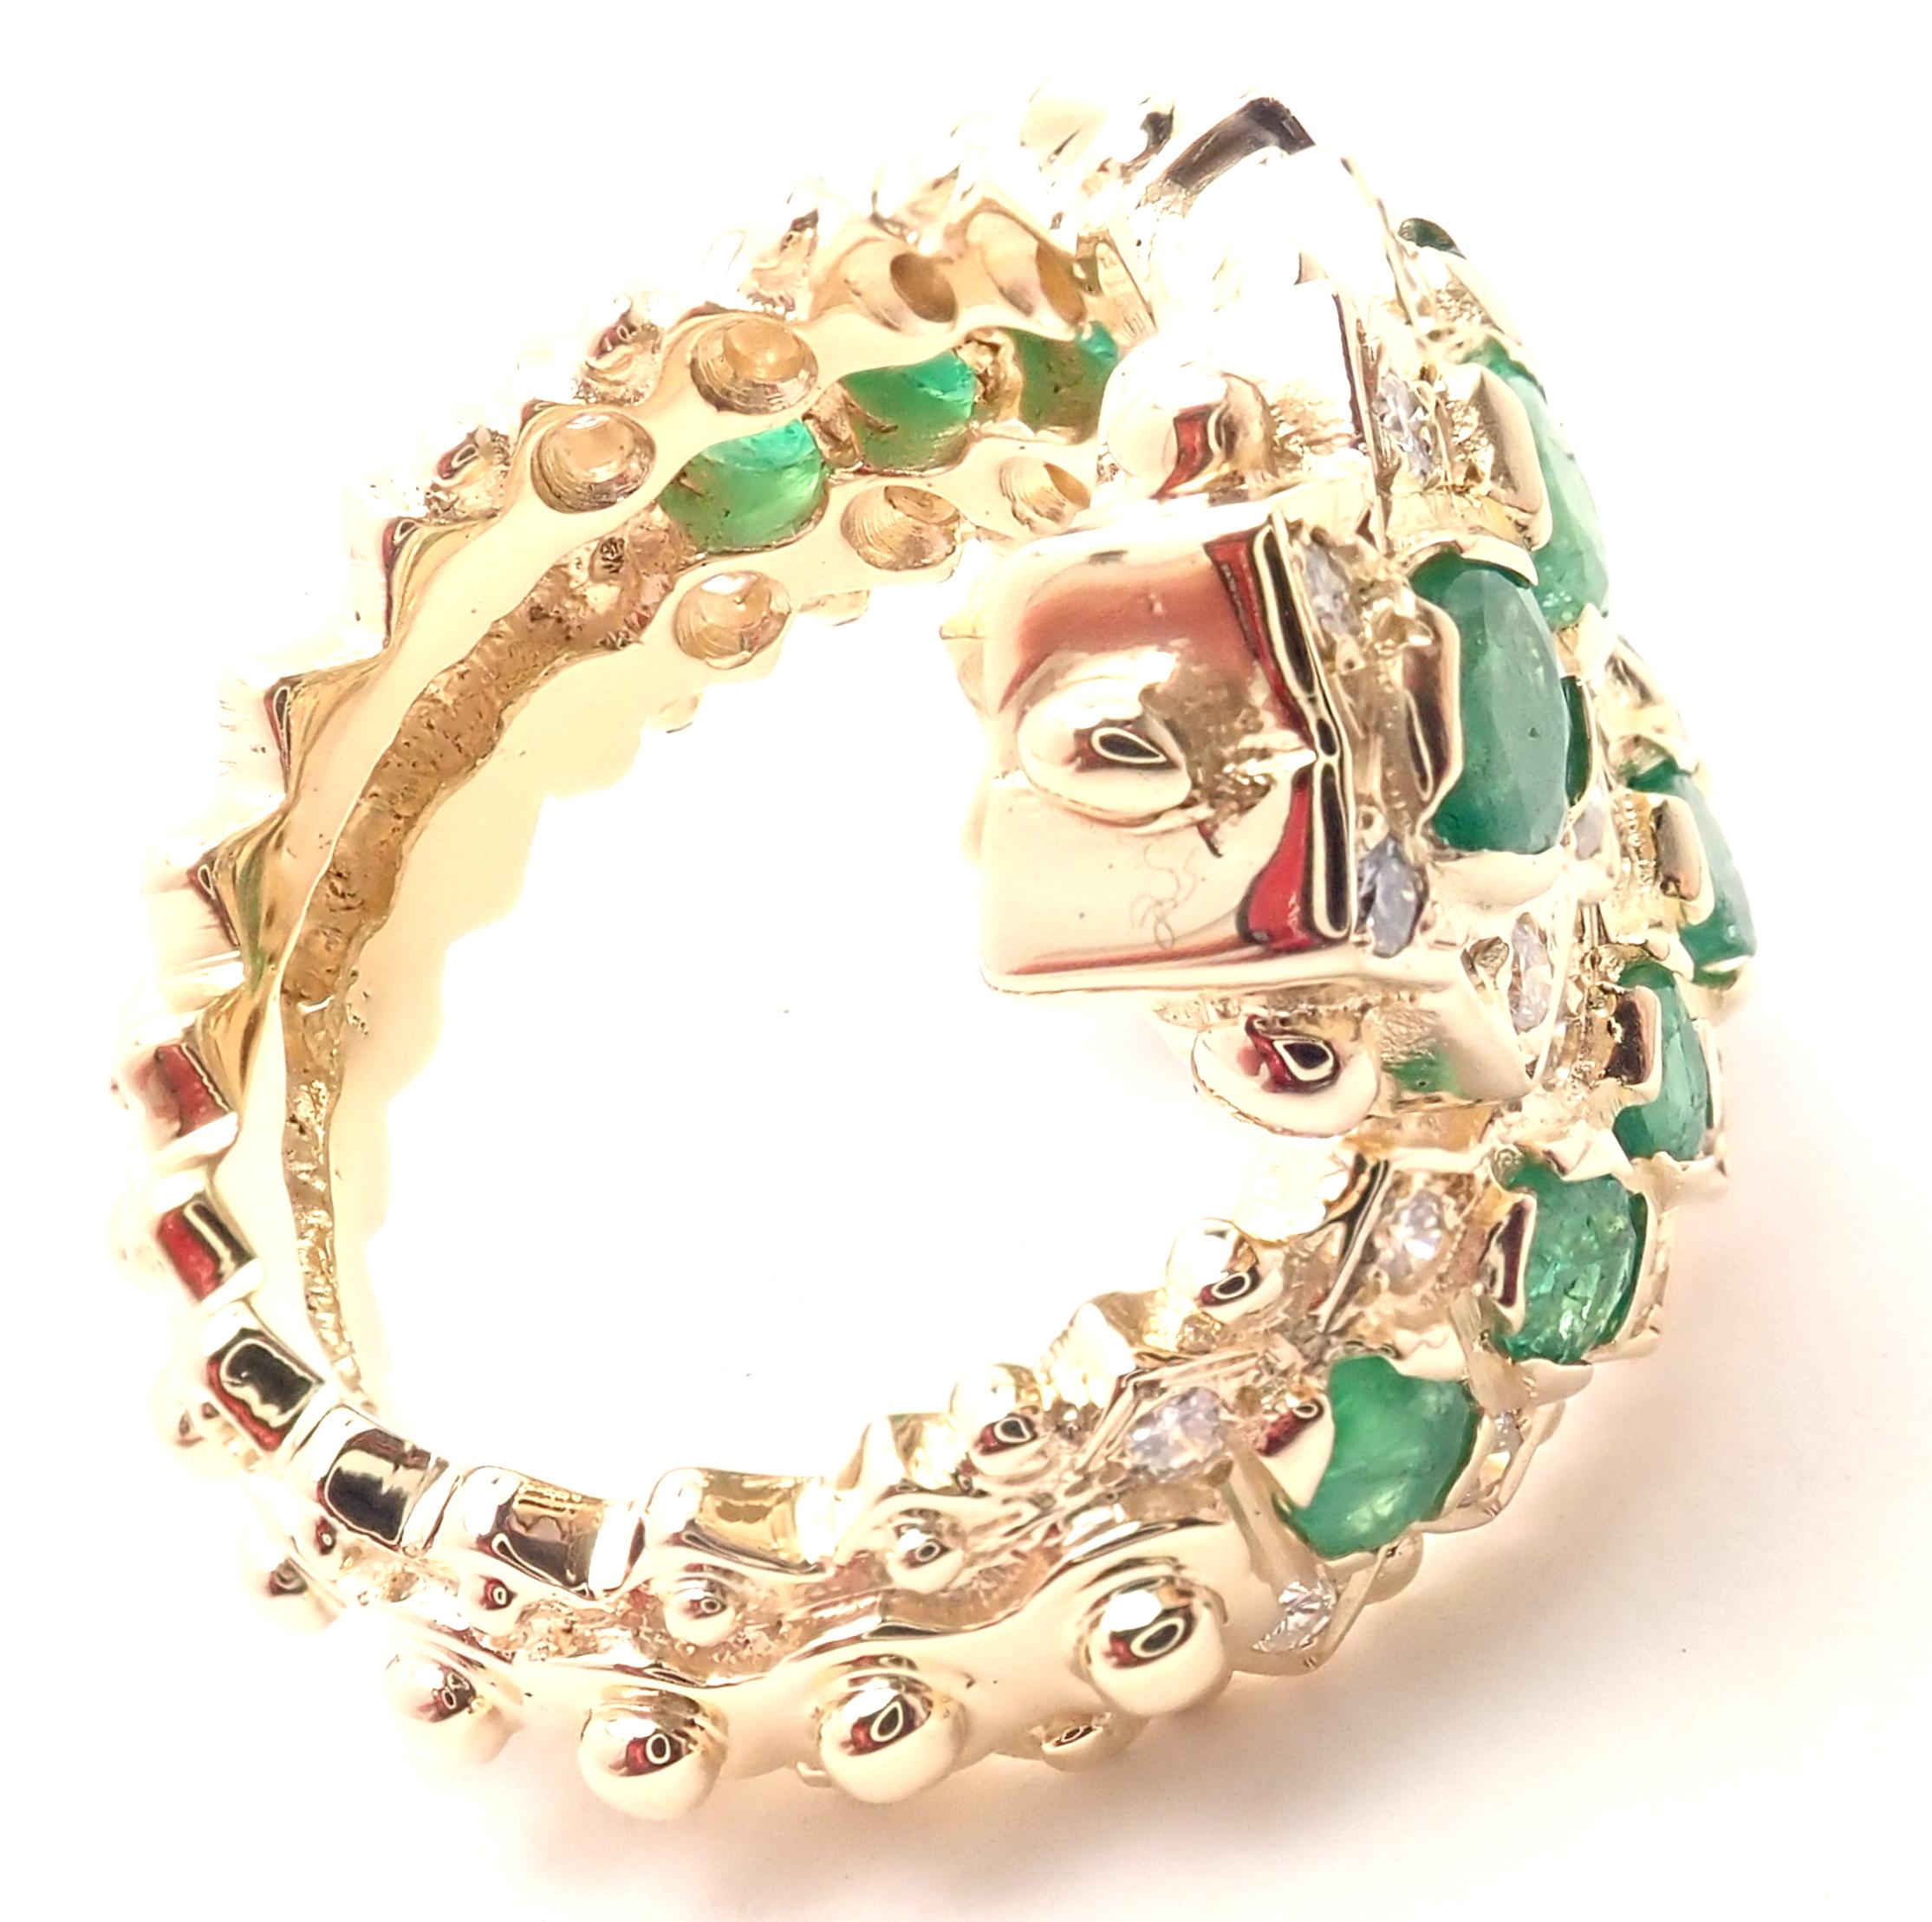 Vintage 18k Yellow Gold Emerald & Diamond Band Ring by Ilias Lalaounis. 
With 34 round brilliant cut diamonds and 14 round emeralds
Details: 
Ring Size: 6.5
Weight: 17.5 grams
Width: 18mm
Stamped Hallmarks: Lalaounis Hallmark A21 750 Greece
*Free